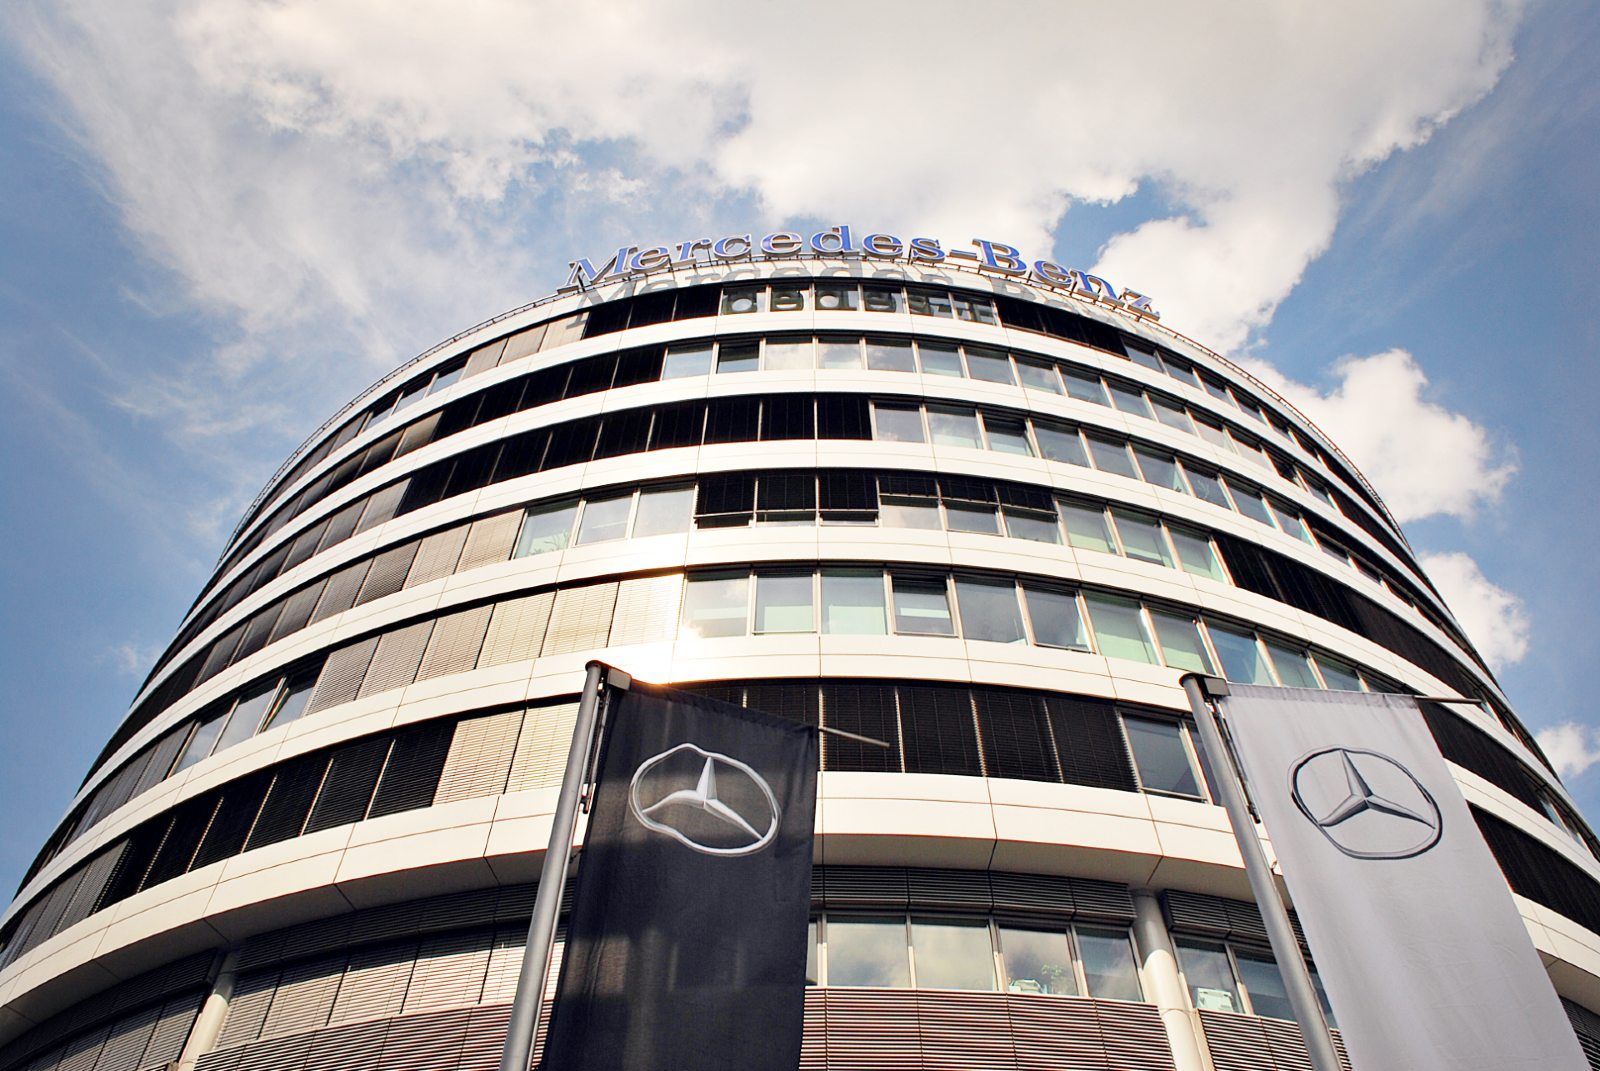 Flags with Mercedes-Benz logos stand in front of a large Mercedes-Benz office building - Mercedes bluetec